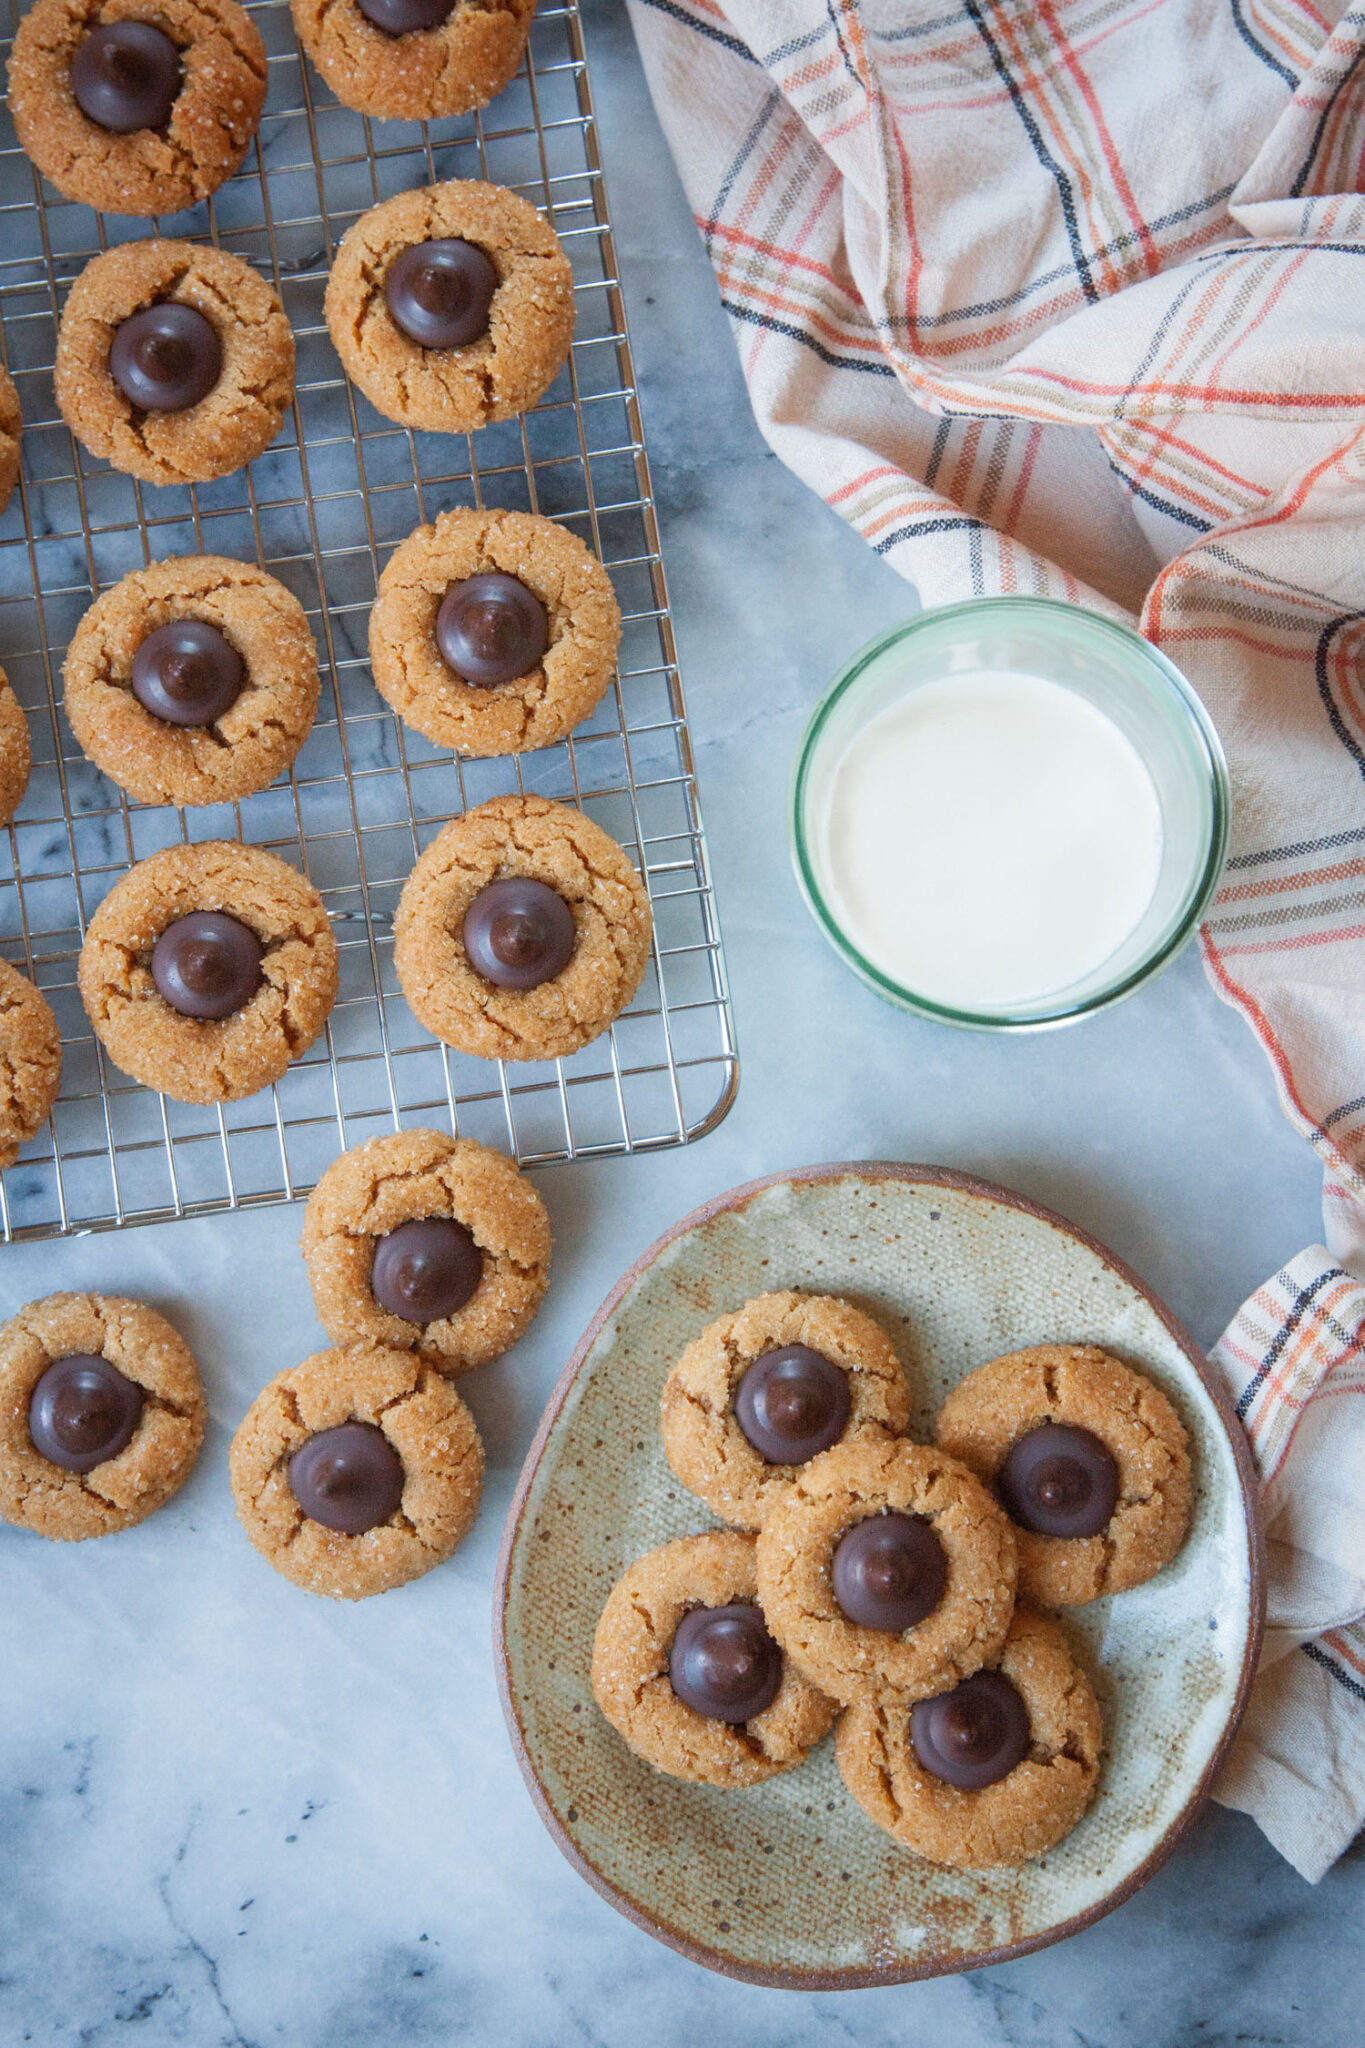 A small plate of peanut butter blossom cookies with a wire cooling rack filled with more cookies. There is a glass of milk and a cloth napkin next to the wire rack and plate. 